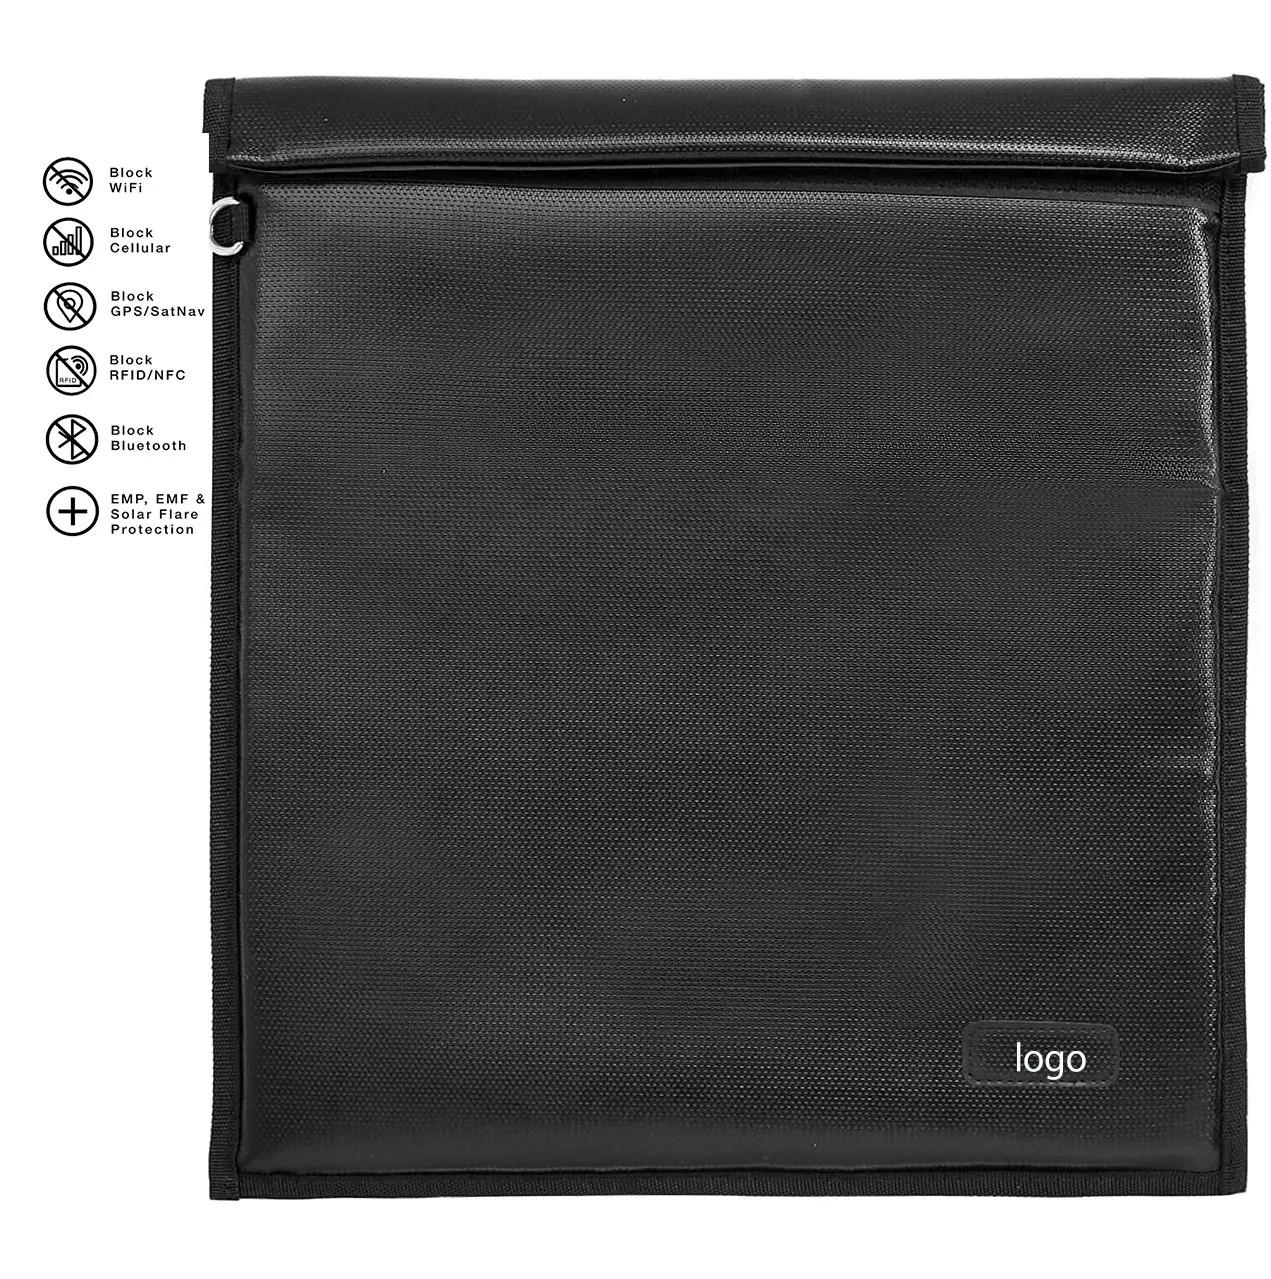 Fireproof & Waterproof Faraday Bags 9.8 x 11 Inches Cage for Faraday Key Fob Protector, Cell Phone Car RFID